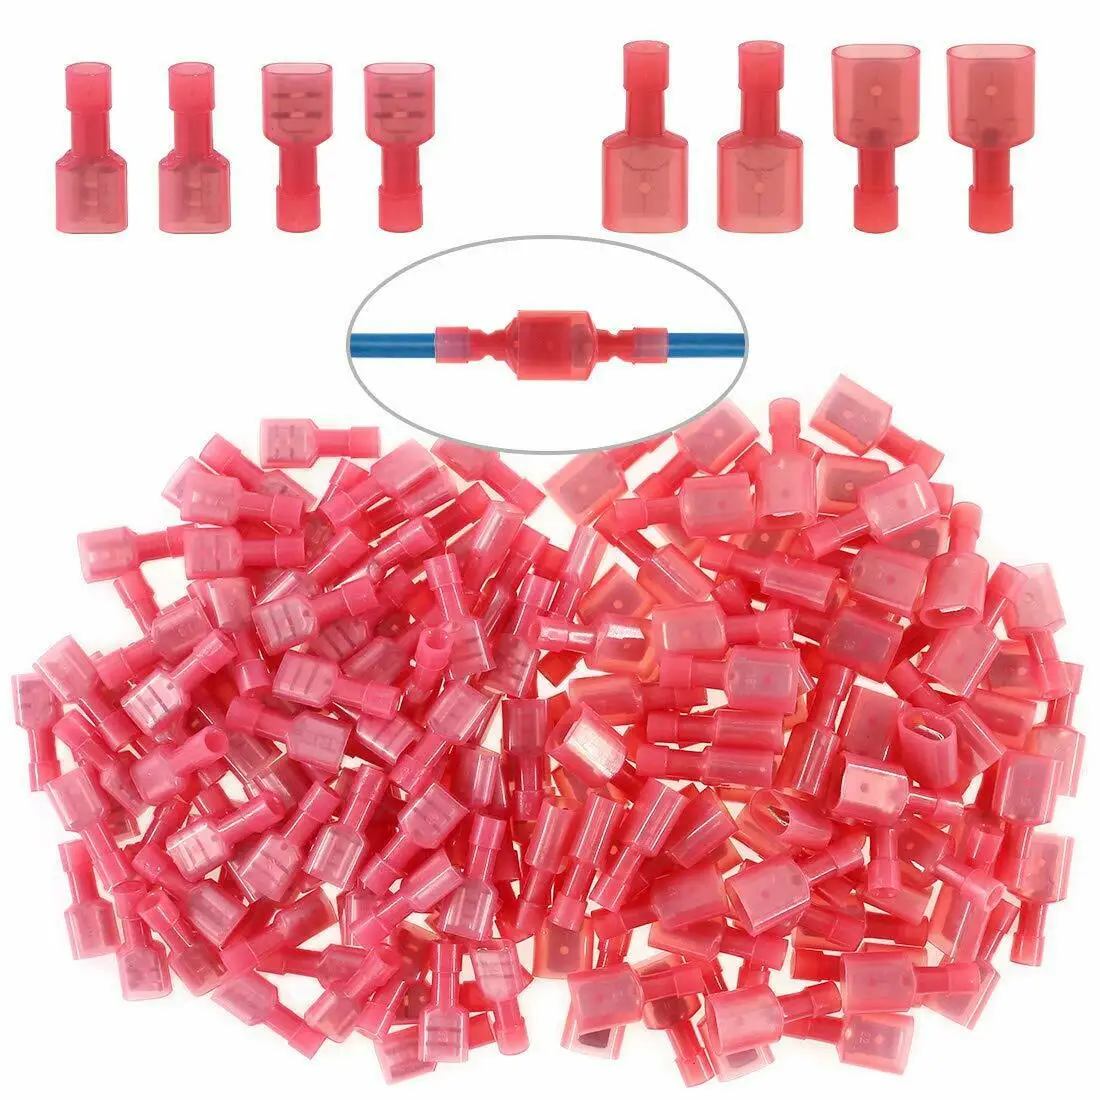 

50pcs Fully Insulated Female Male Spade Nylon Quick Disconnect Electrical Insulated Crimp Terminals Connectors Assortment Kit